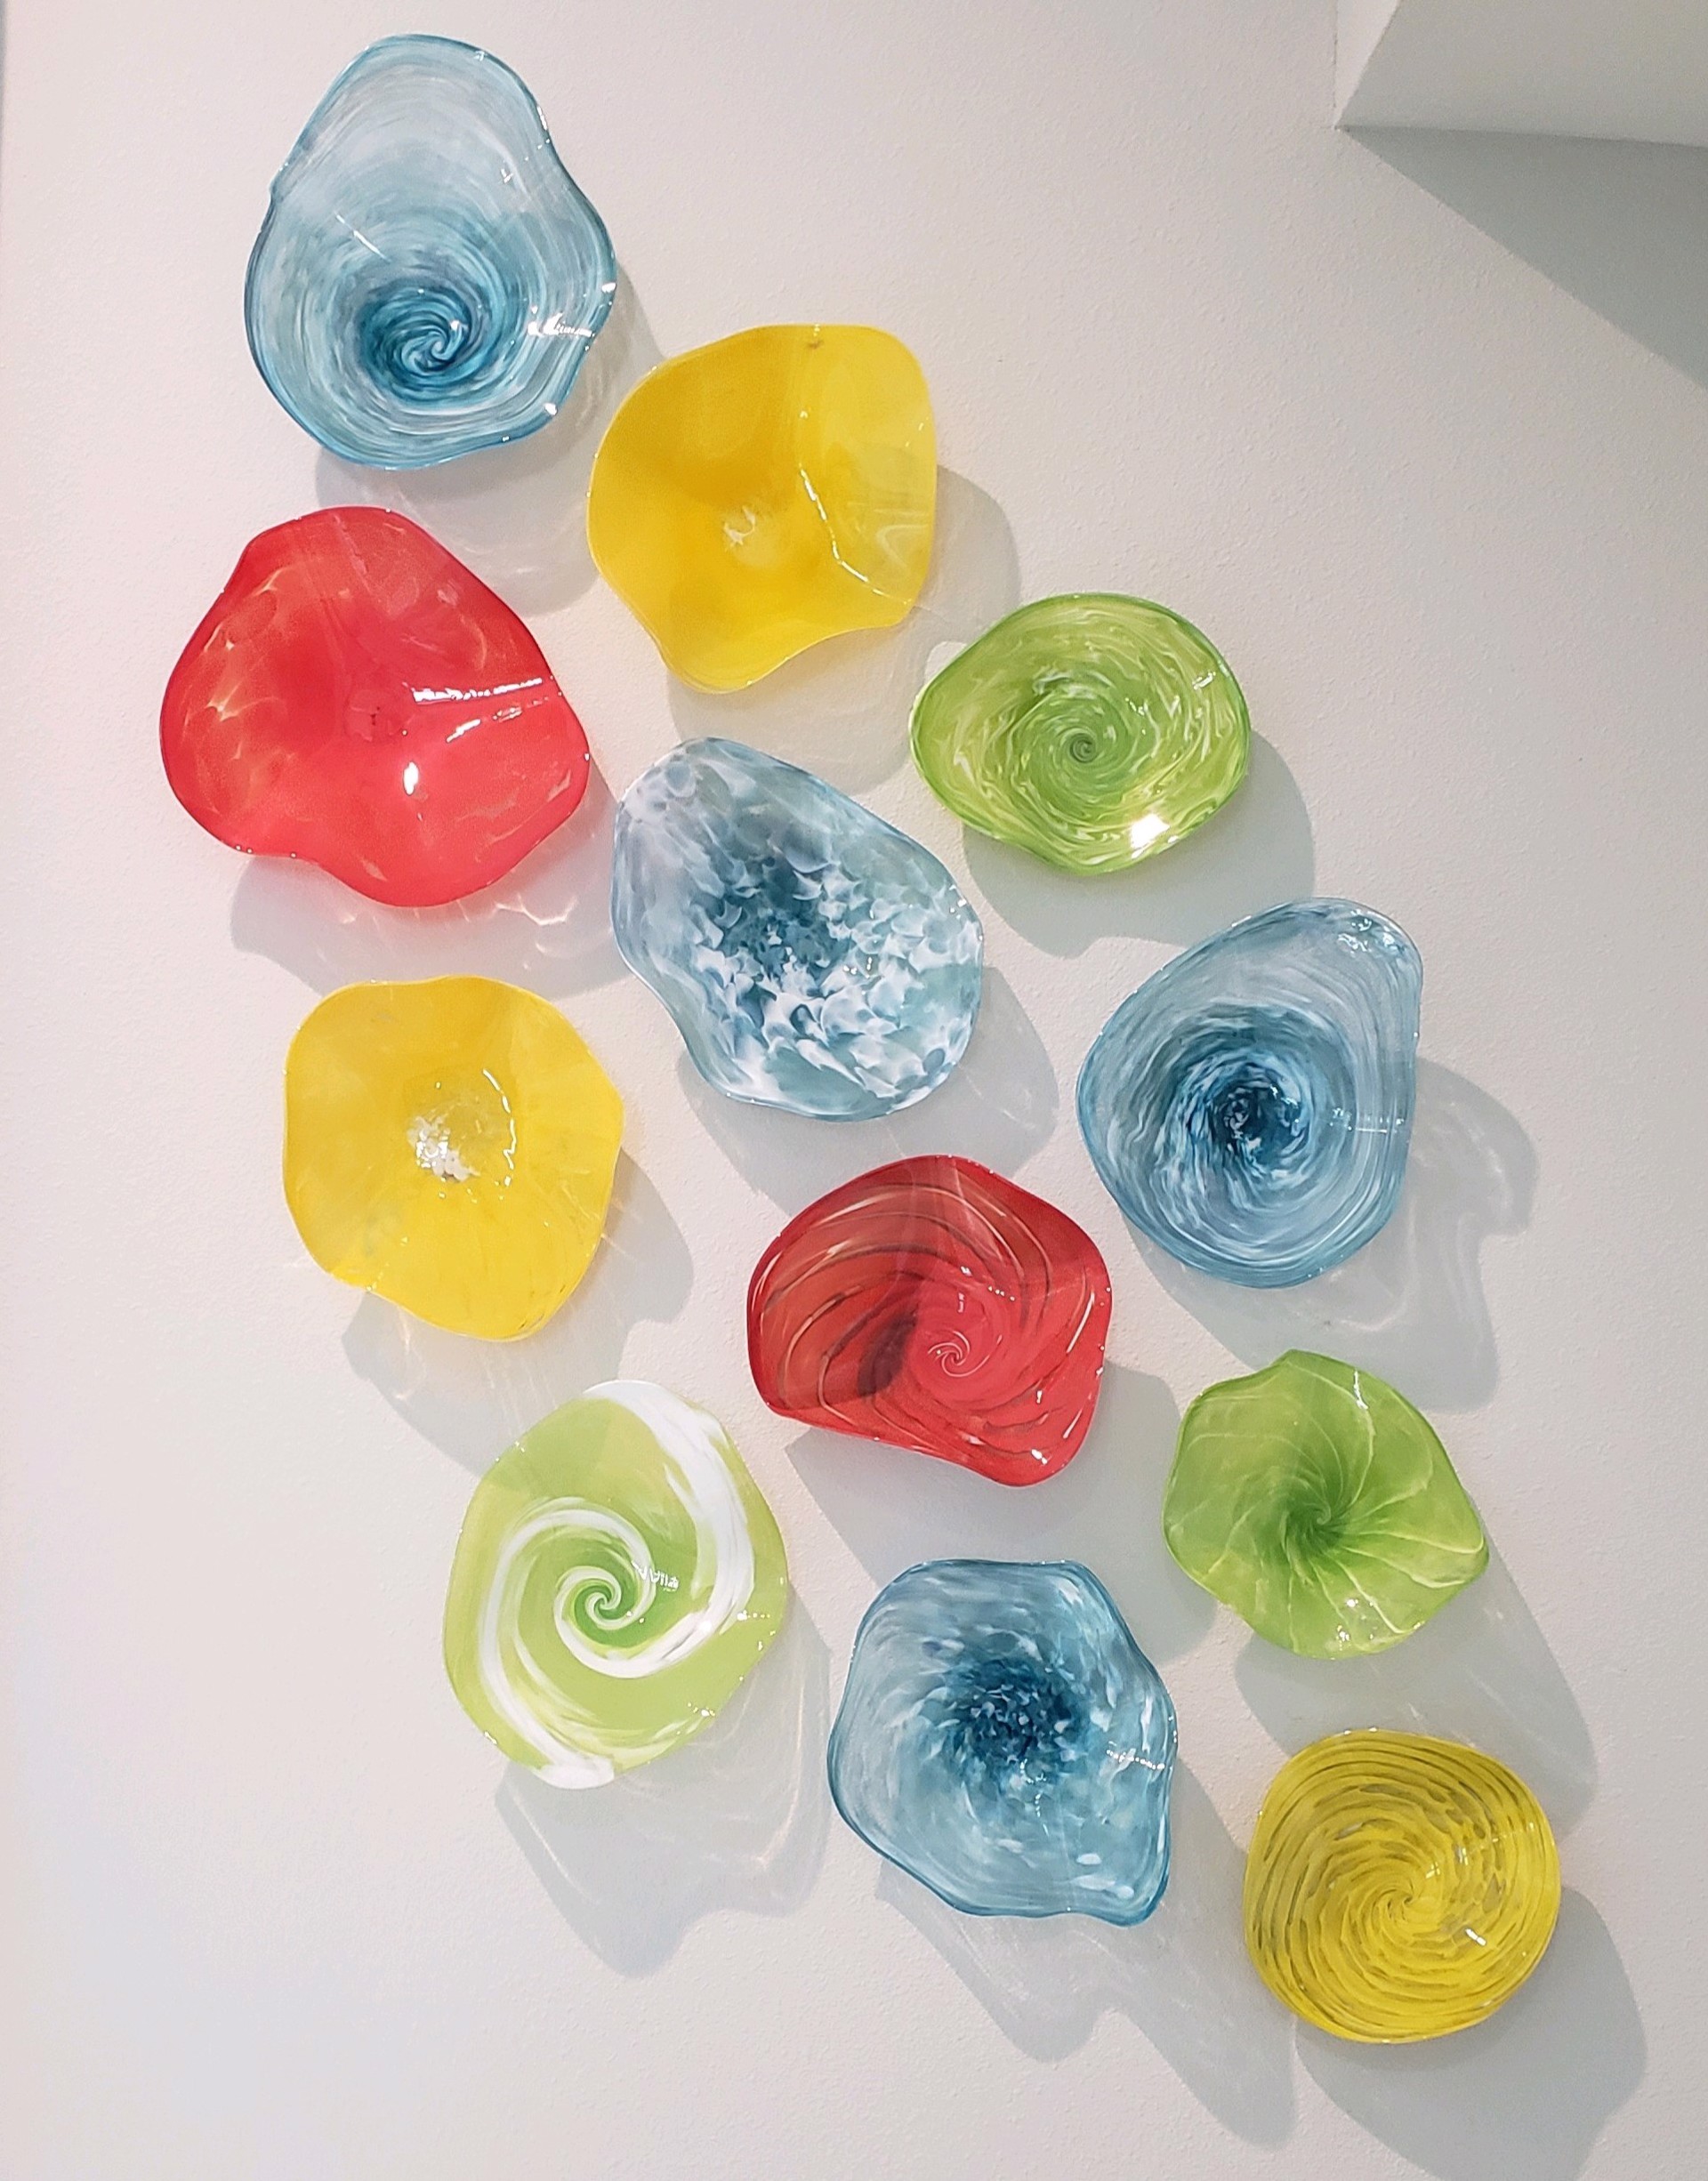 12 Piece Multi Color Glass Blossom Installation by T. Miller